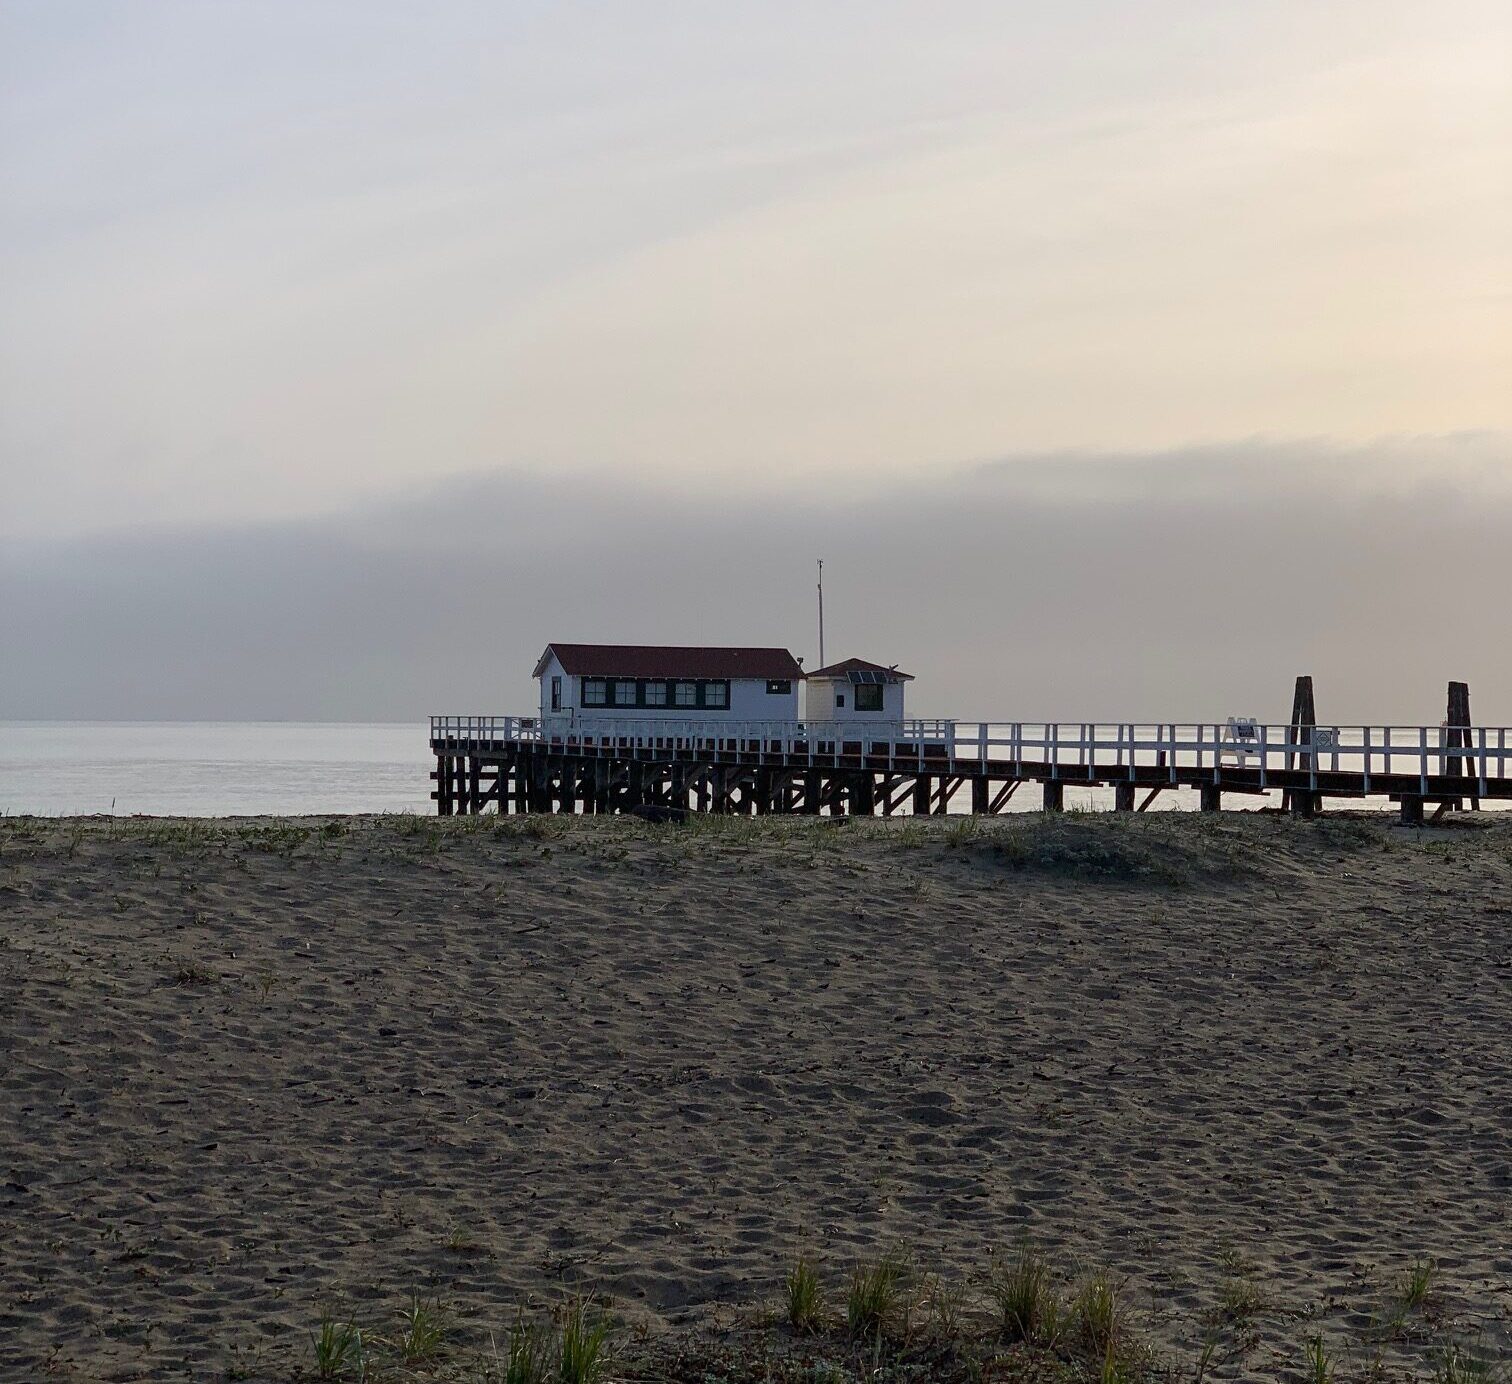 GFNMS Pier House at sunrise. Fog bank seen in background.